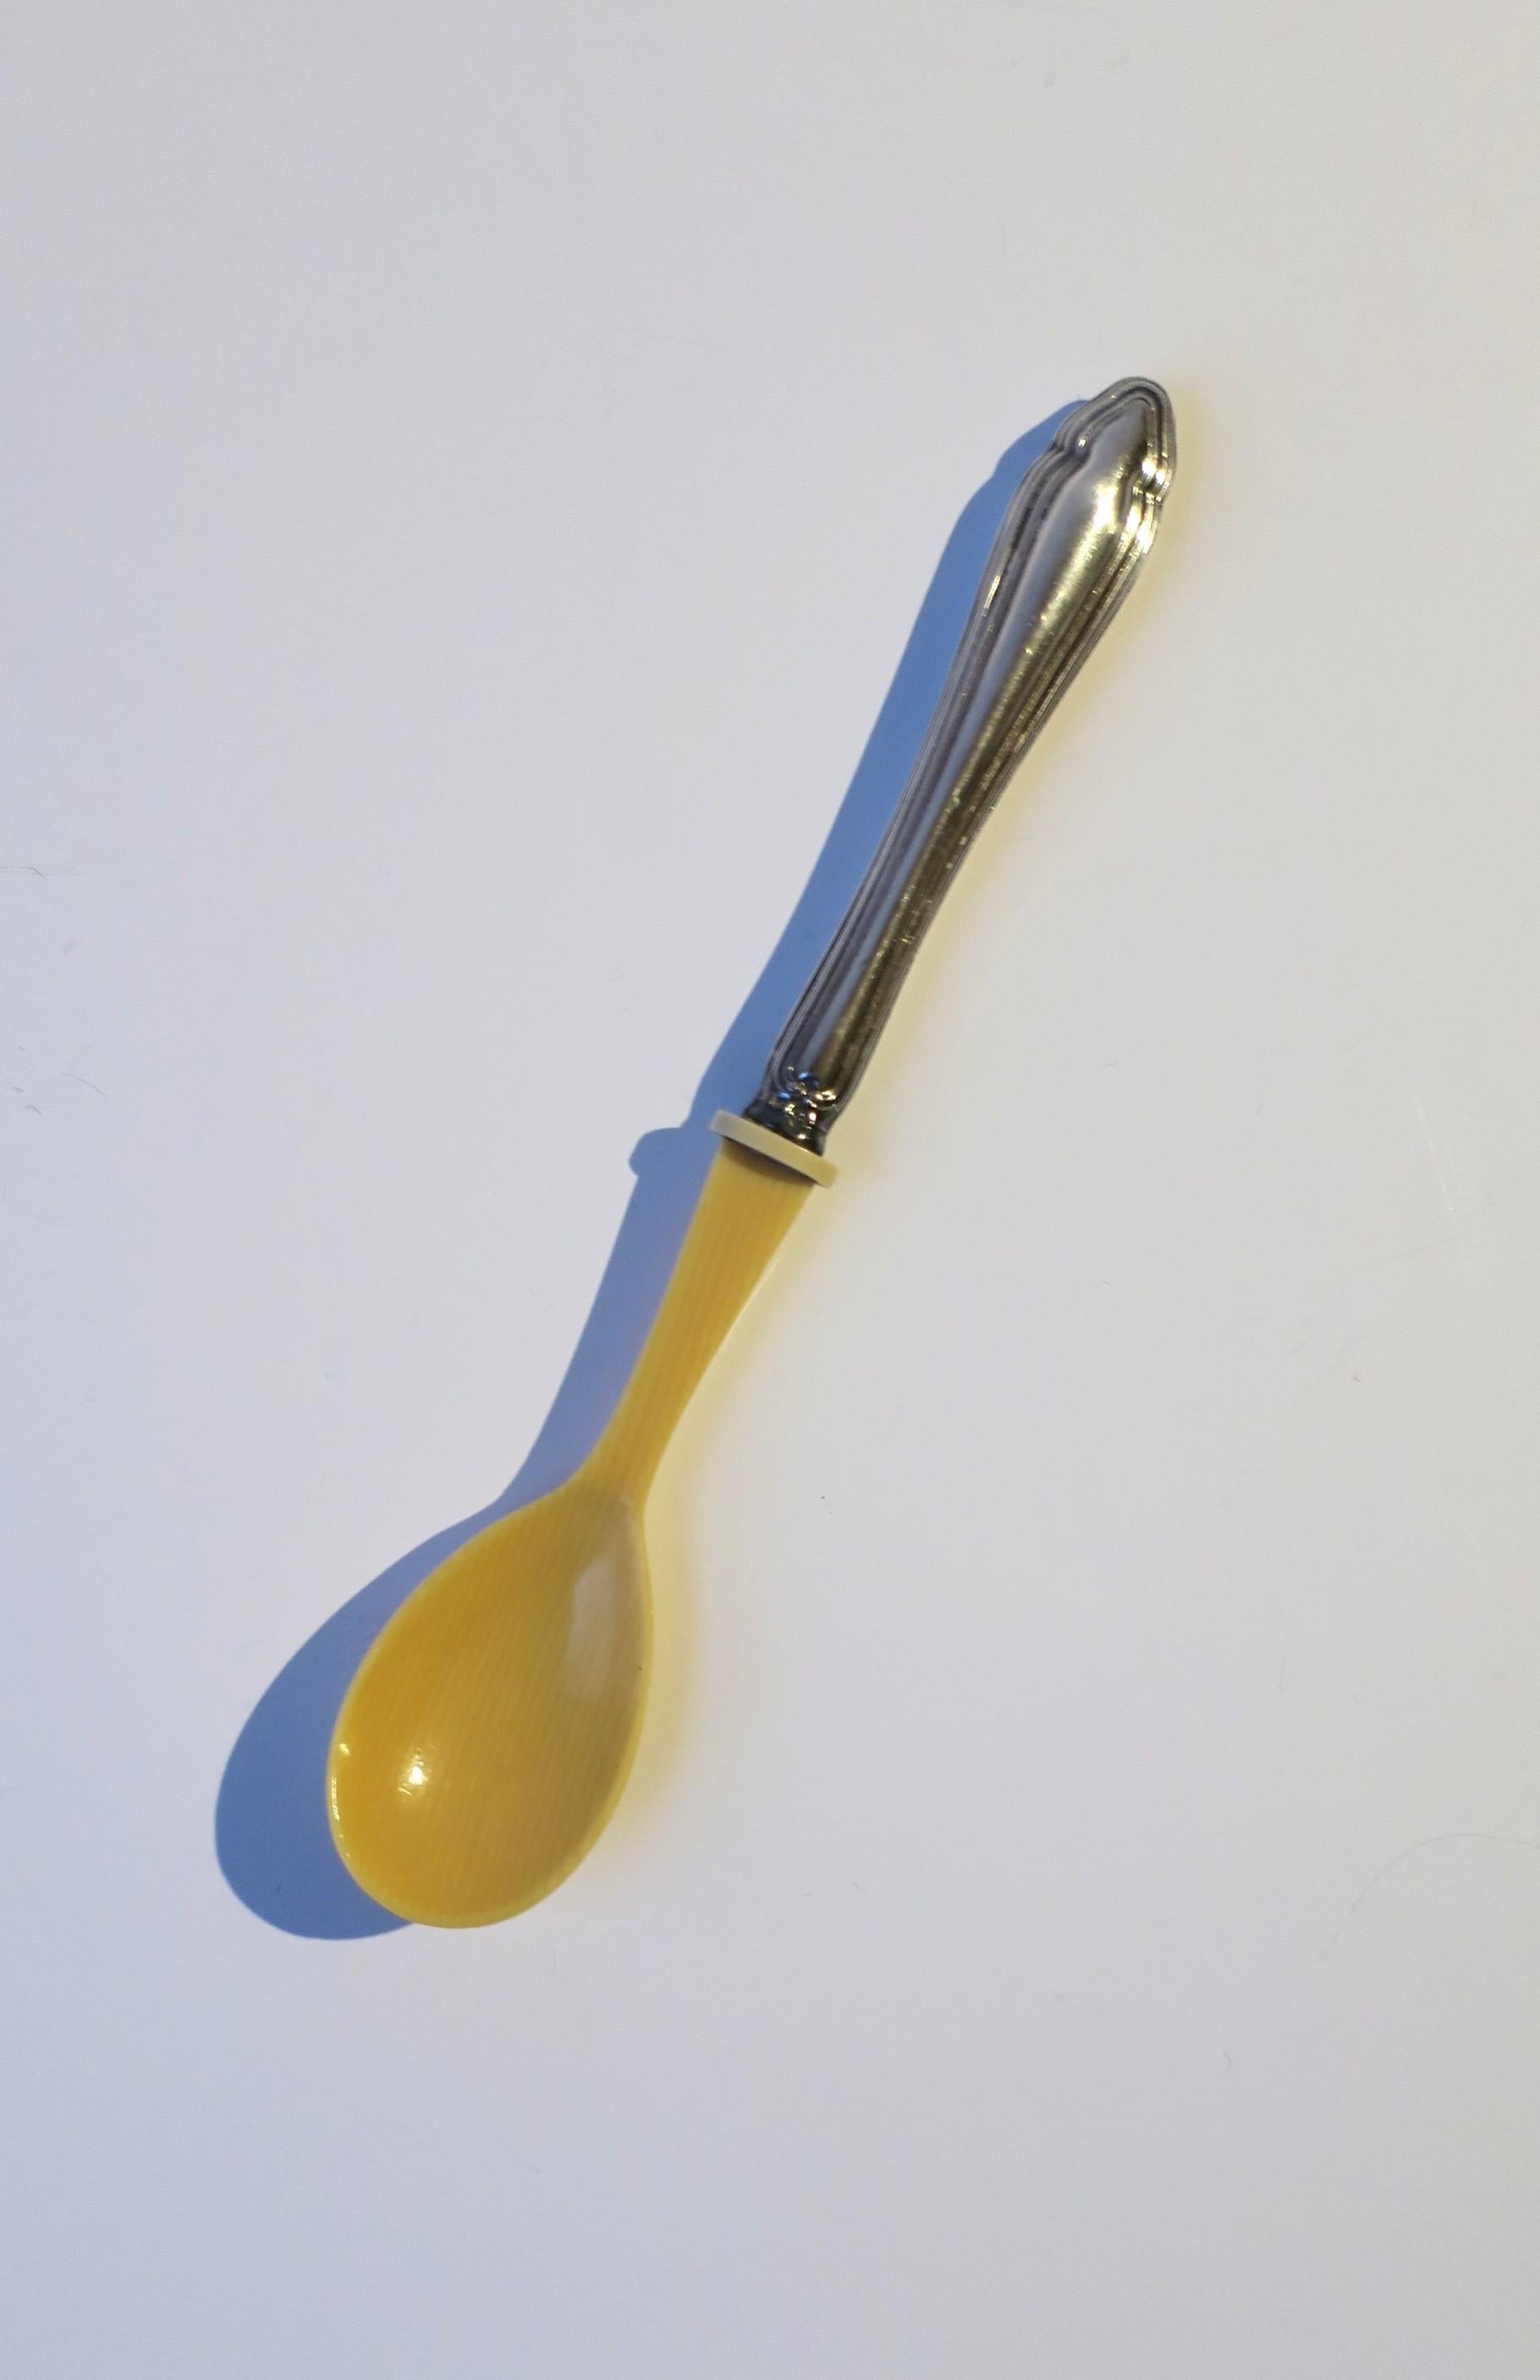 A sterling silver and celluloid baby spoon, circa early-20th century. Piece has a sterling silver handle and celluloid 'bowl'. A beautiful spoon in very good condition, as shown. A great piece for a new baby. Piece would also make a nice gift.